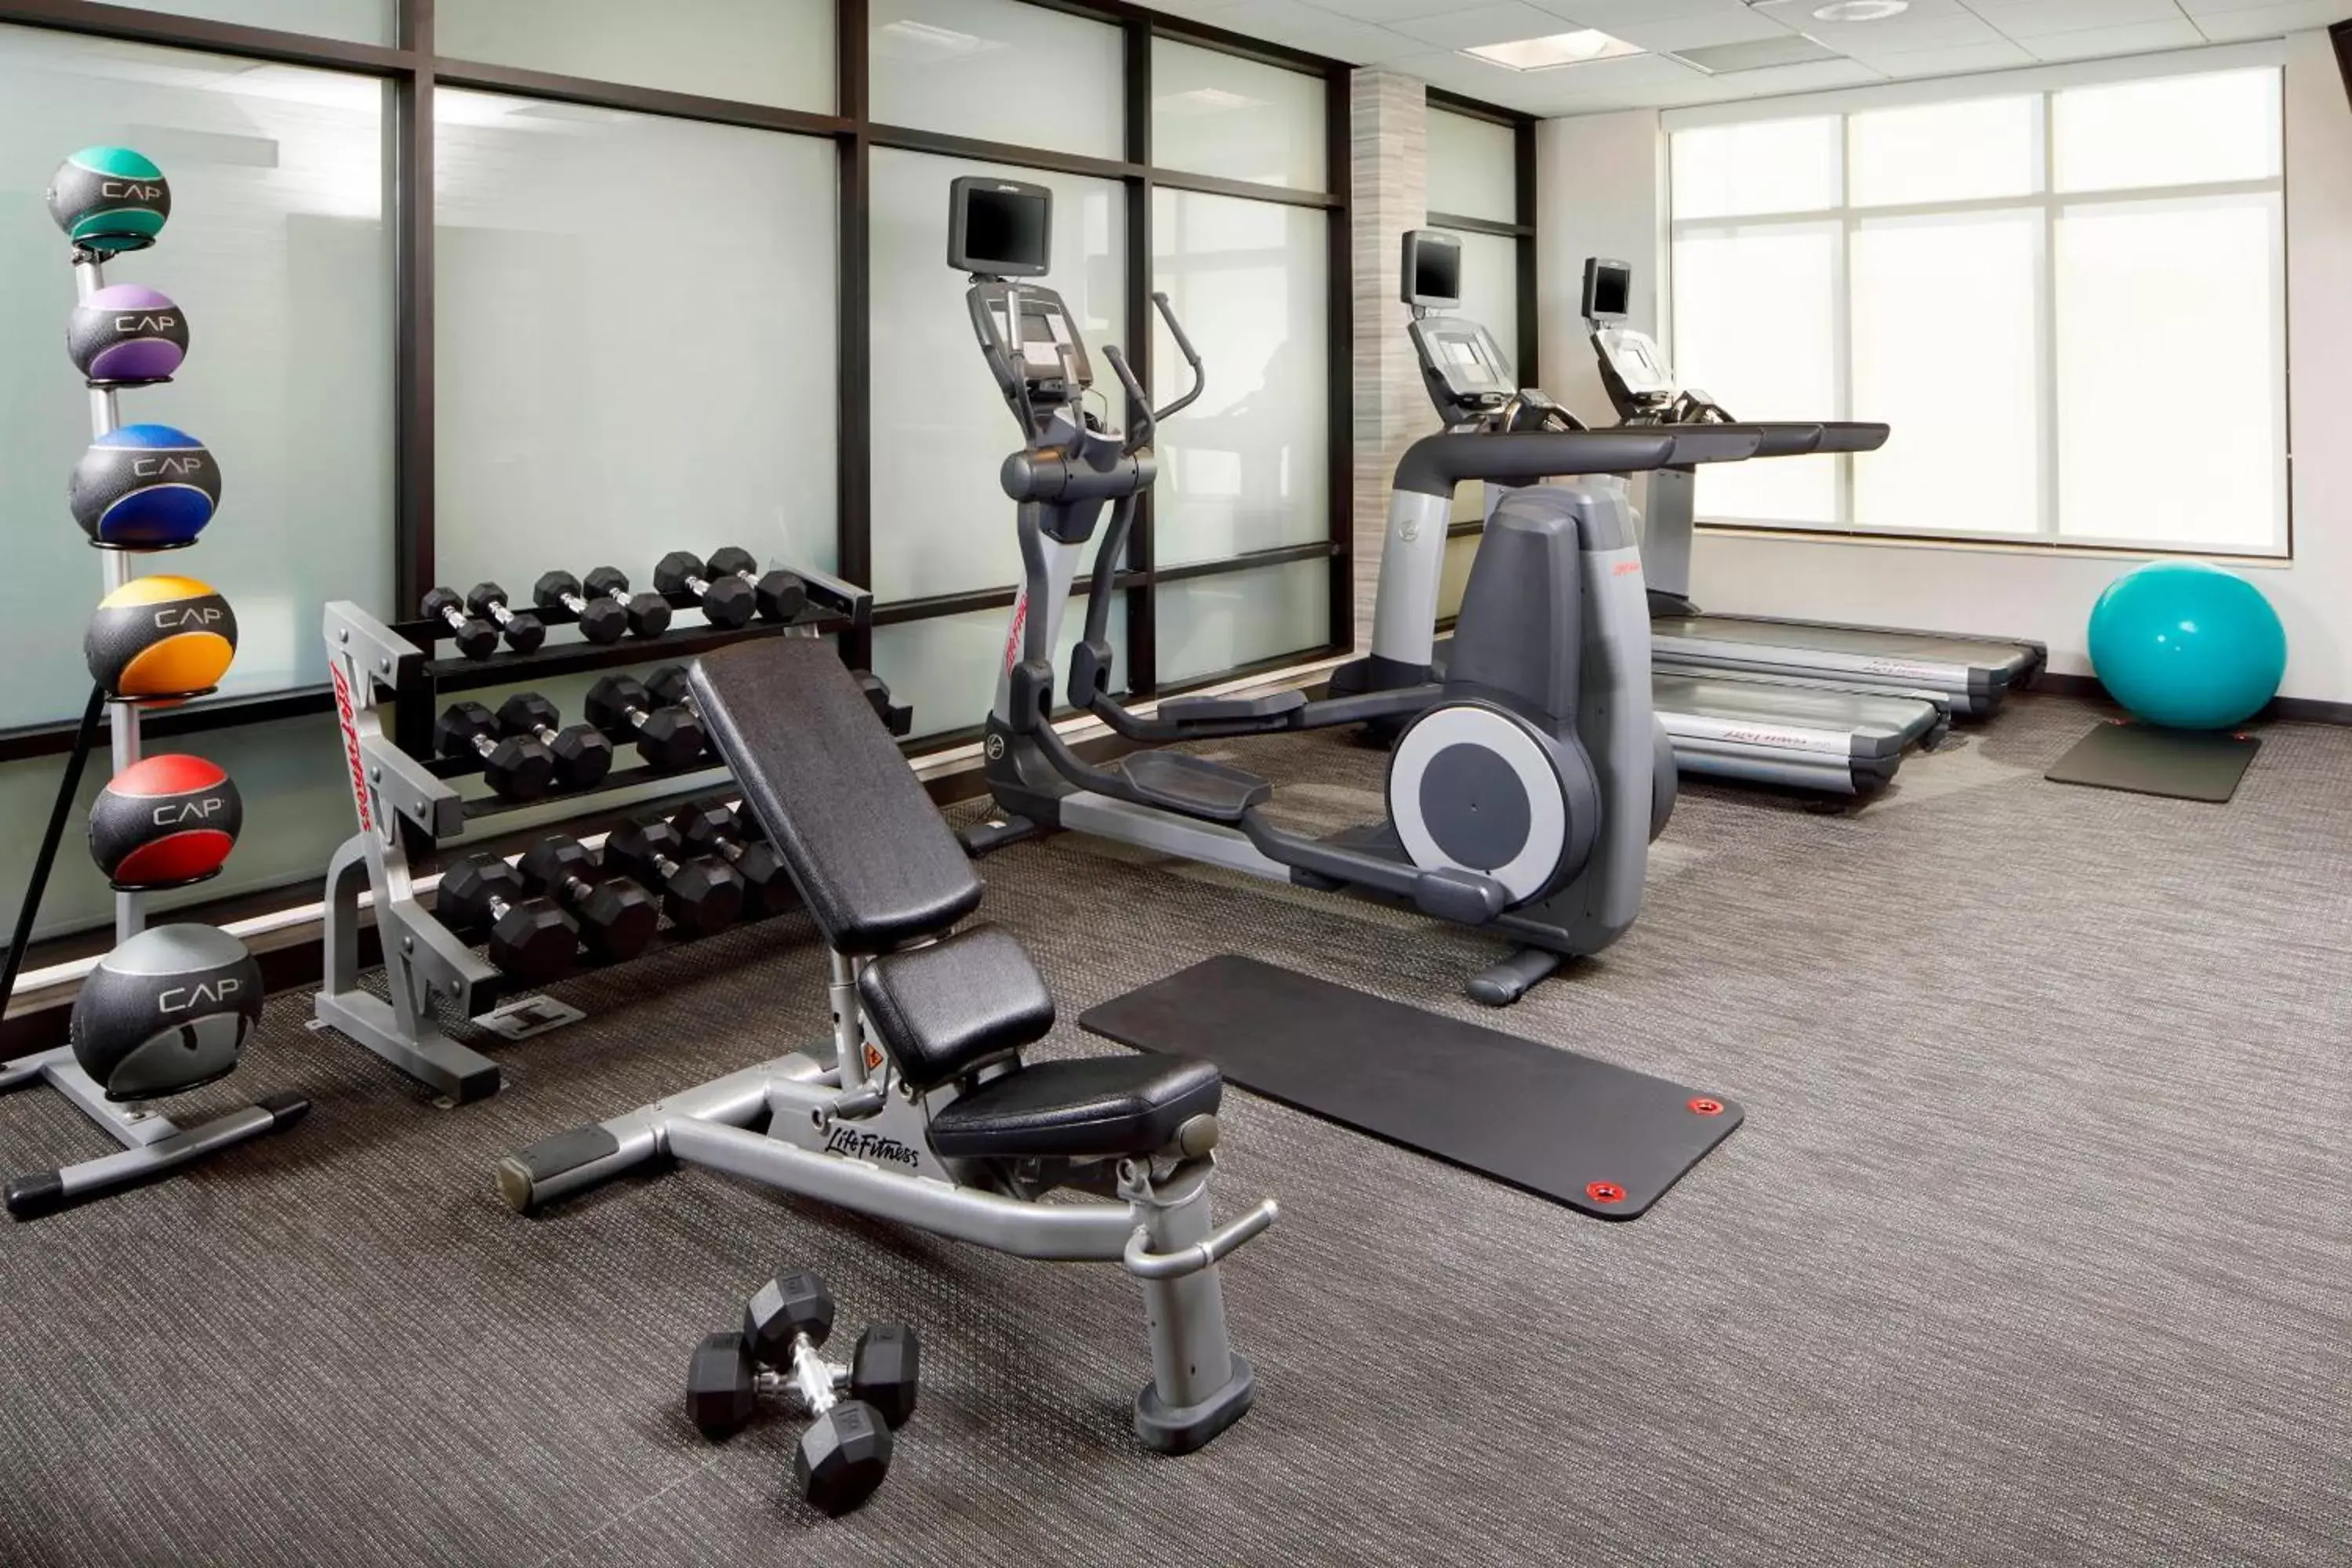 Fitness centre/facilities, Fitness Center/Facilities in Courtyard Pittsburgh Settlers Ridge/Robinson Township